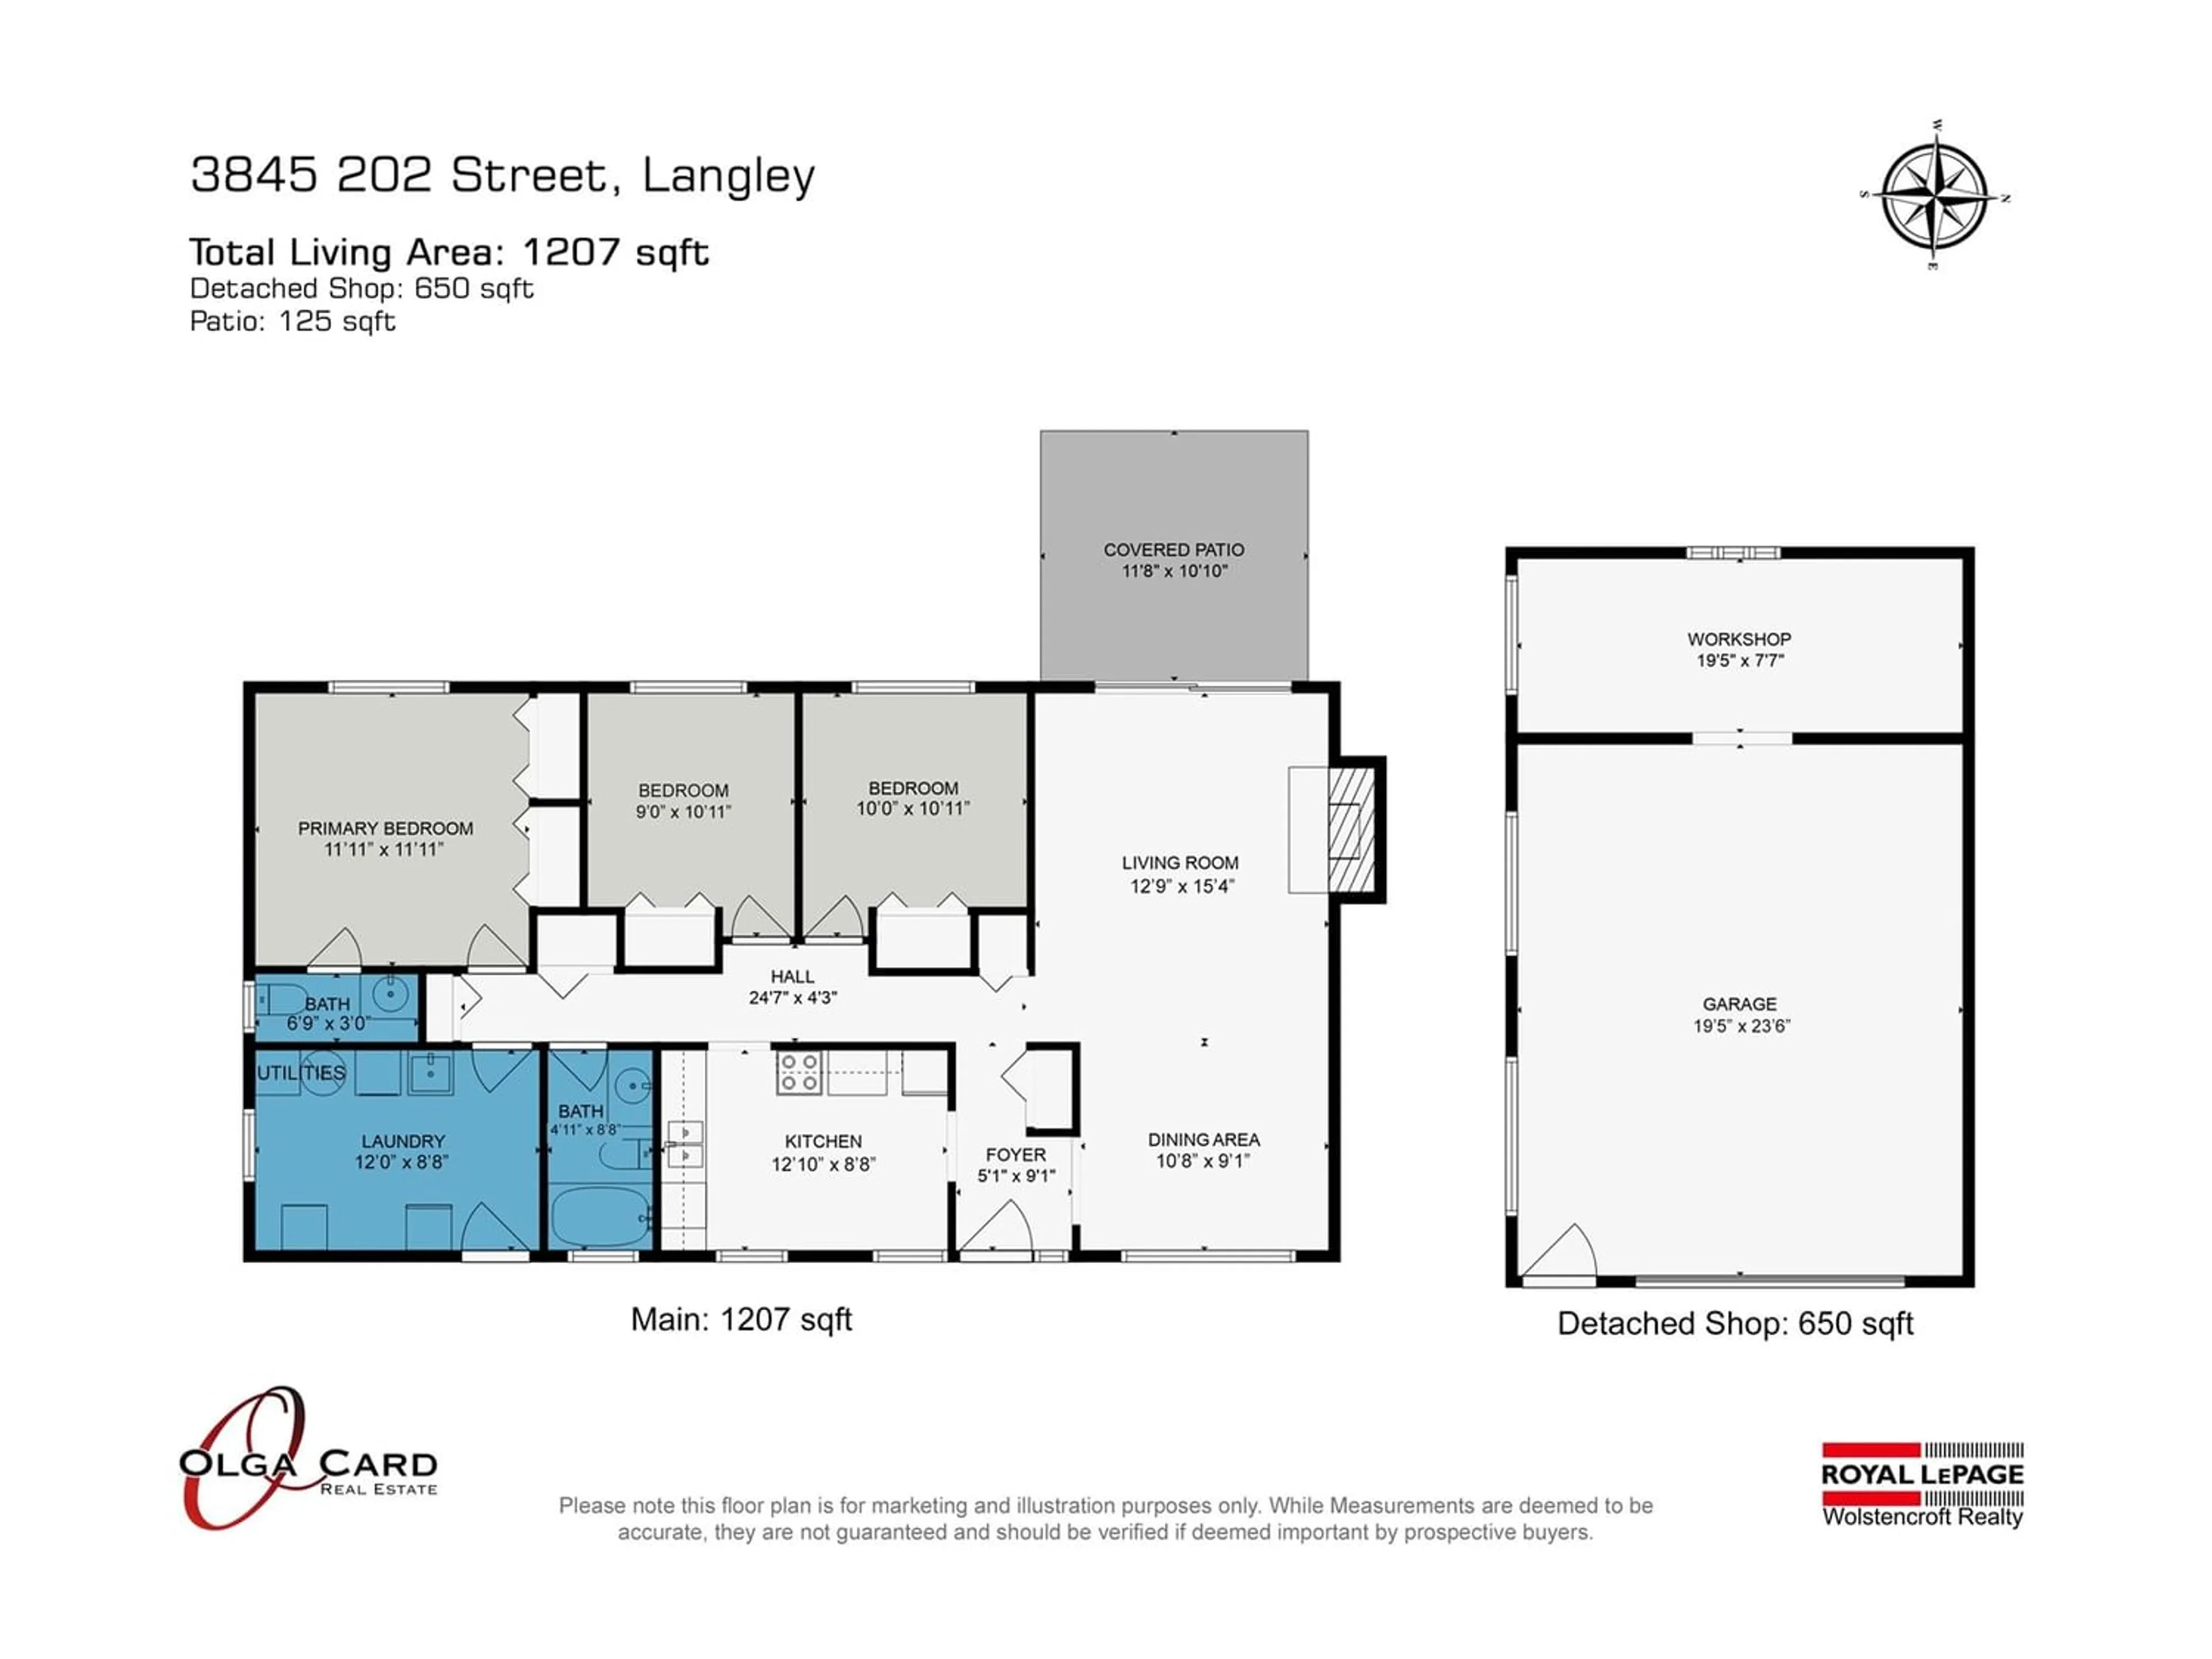 Floor plan for 3845 202 STREET, Langley British Columbia V3A1R9